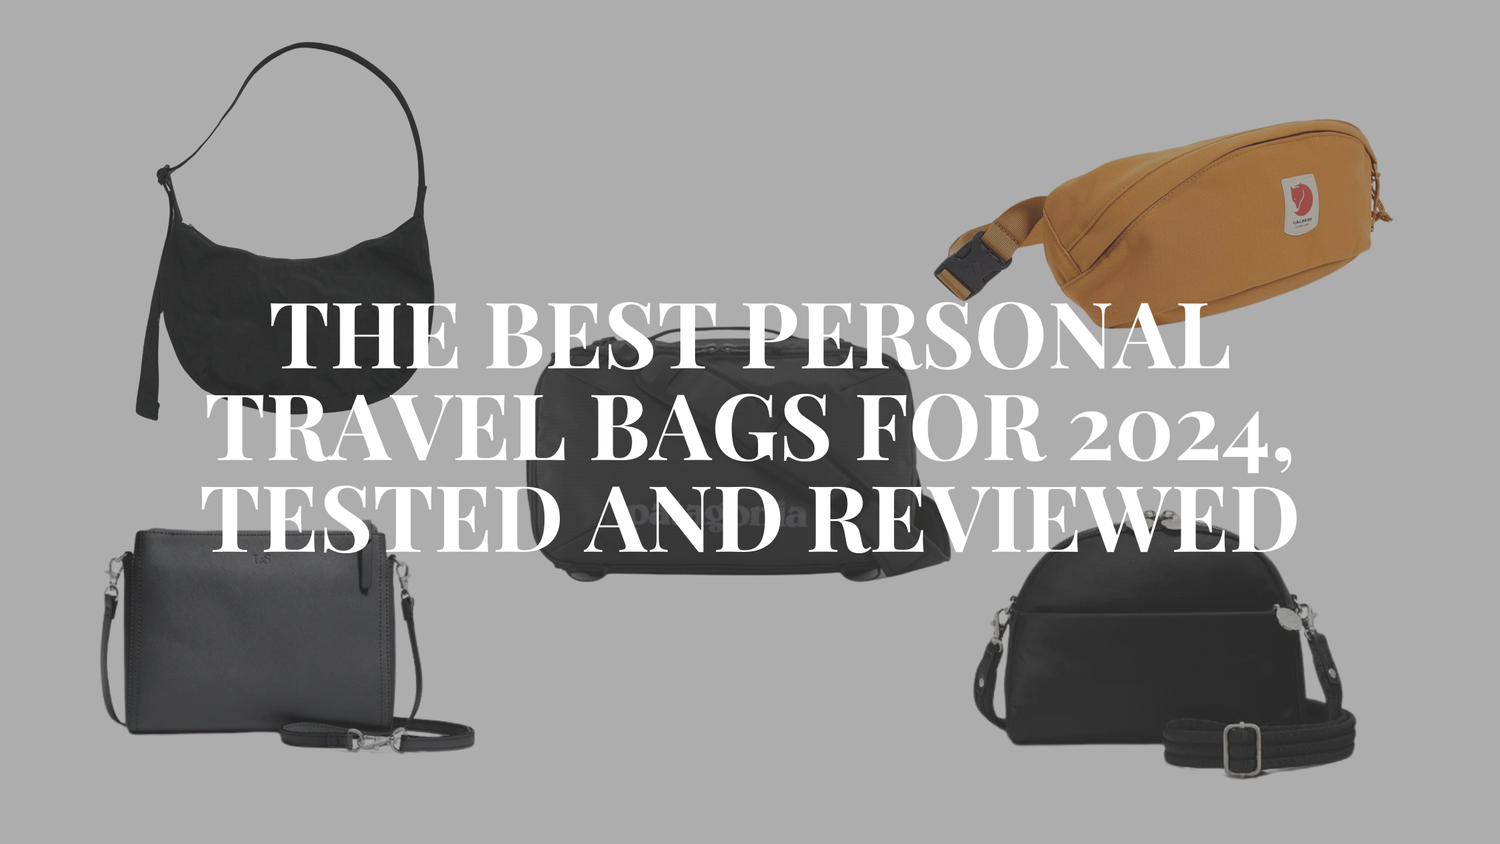 The Best Personal Travel Bags for 2024, Tested and Reviewed